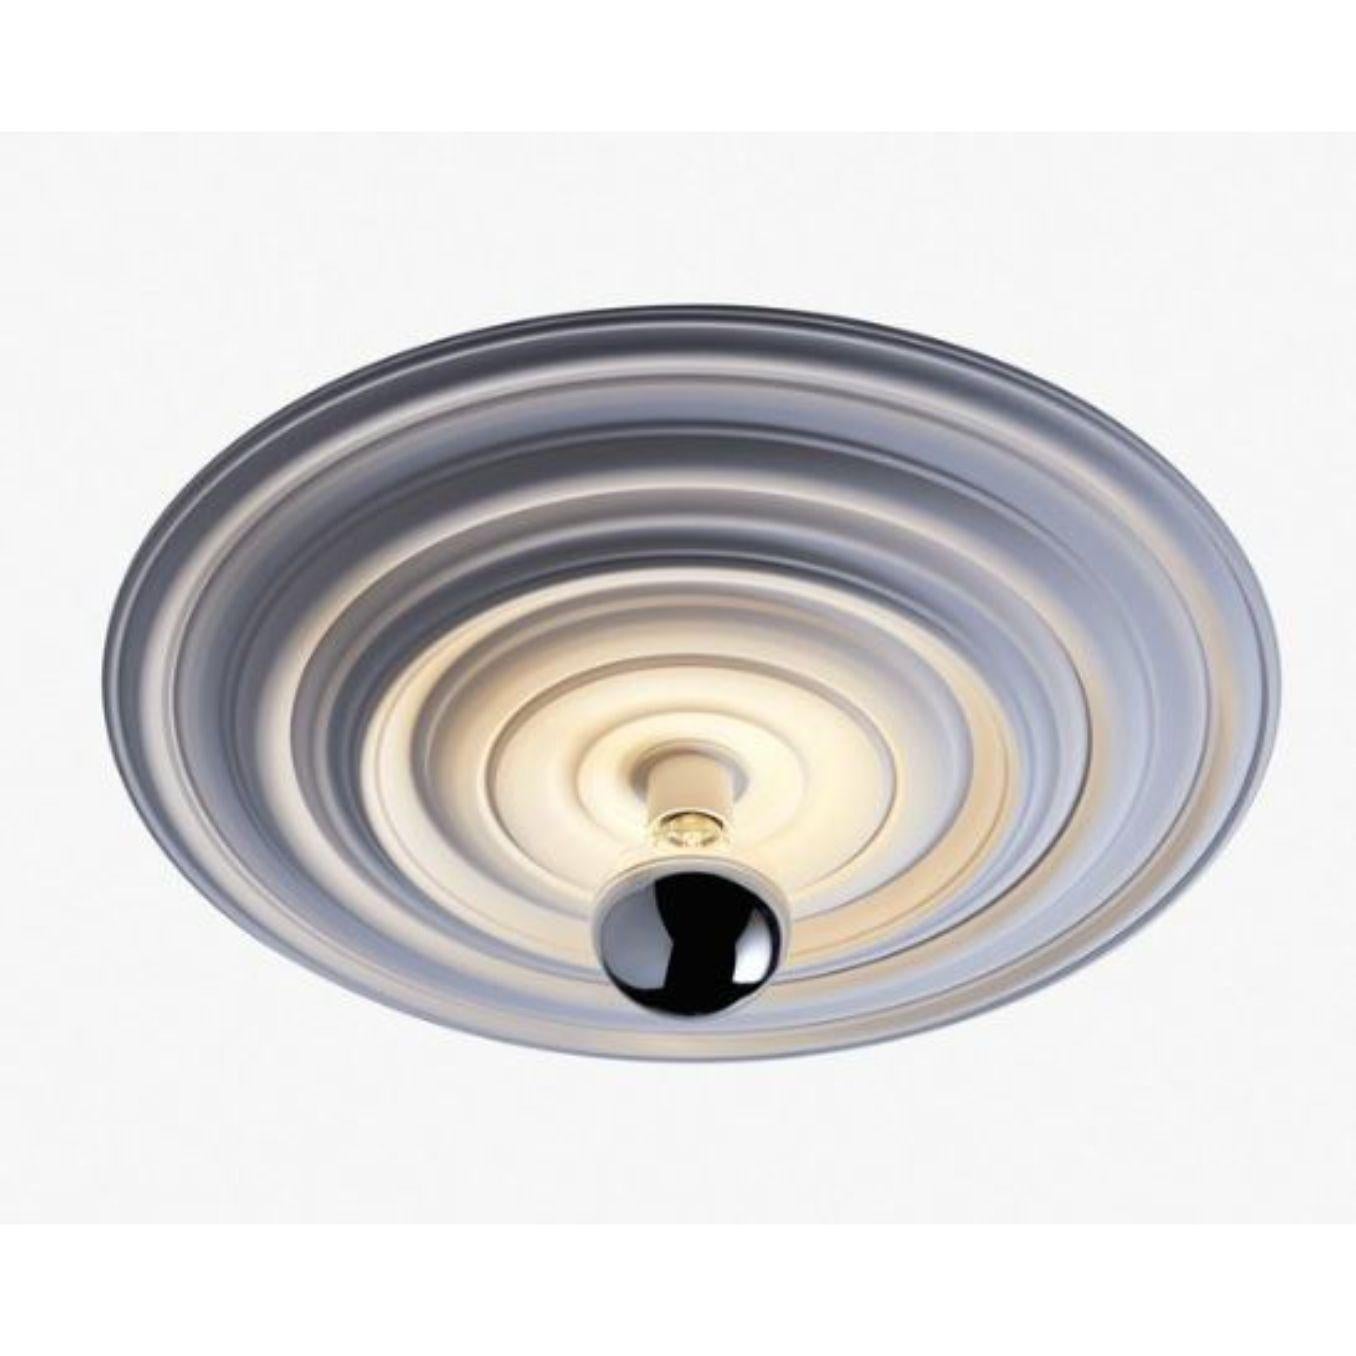 Large Odeon ceiling light by Radar.
Design: Bastien Taillard.
Materials: Metal, plaster of Paris, fiberglass.
Dimensions: W 77 x D 77 x H 15 cm.
Also Available with a double layer of mat white paint or in raw plaster ready to paint. Bulb socket